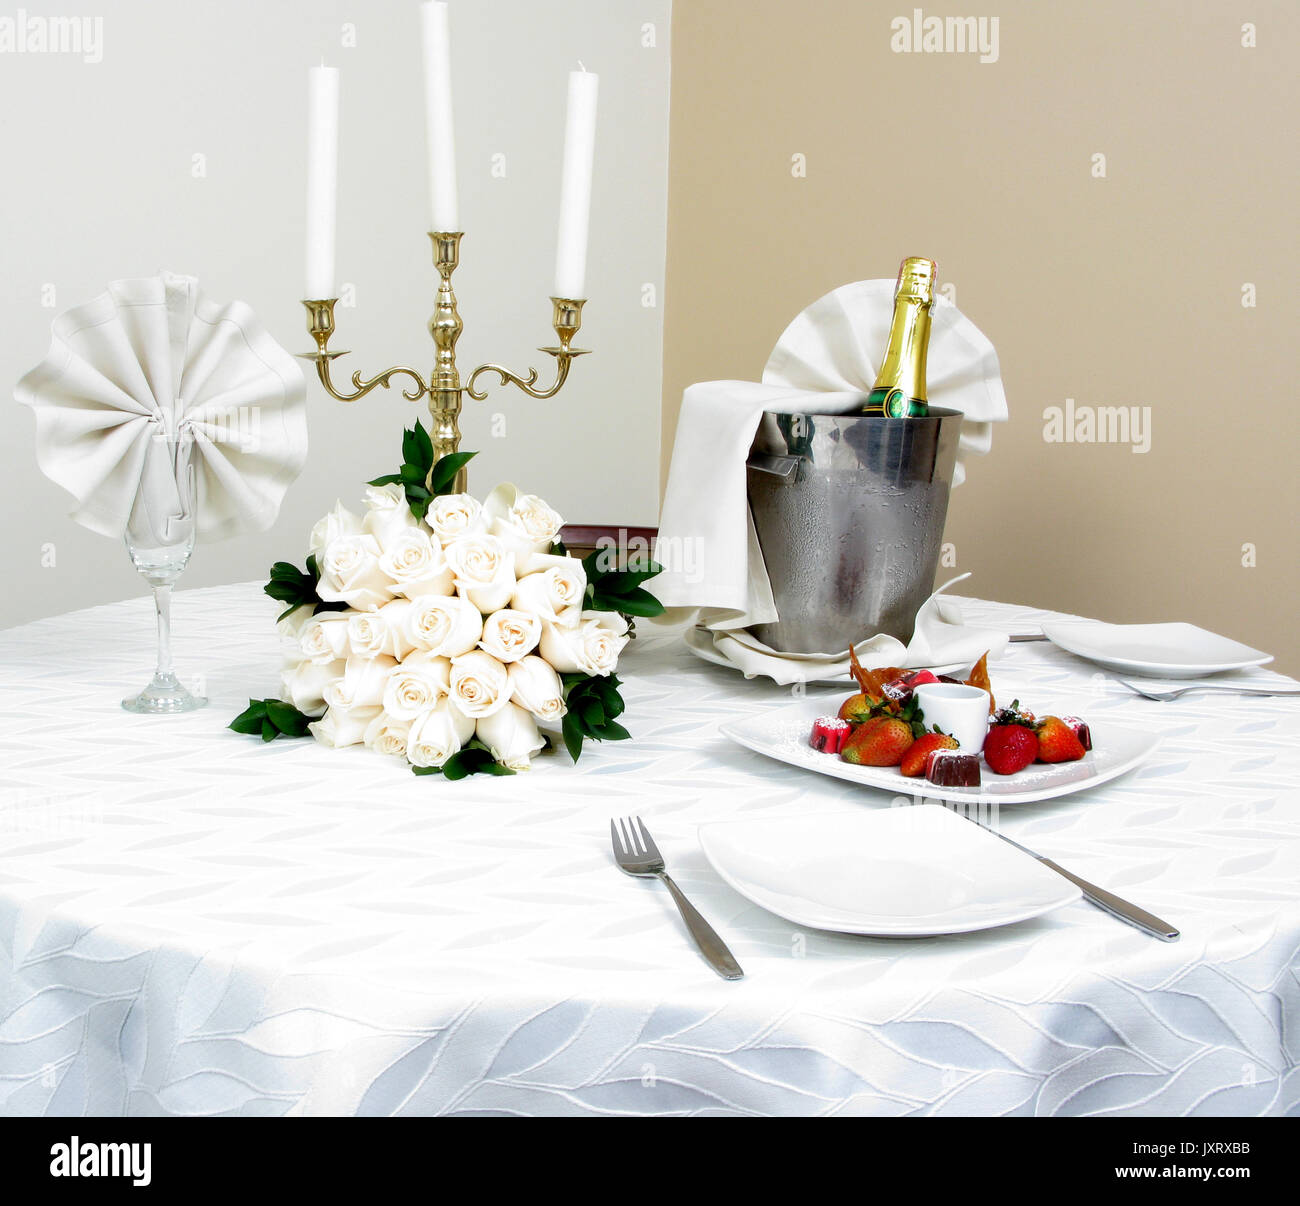 Table setting for a wedding or dinner event, very shallow depth of field Stock Photo